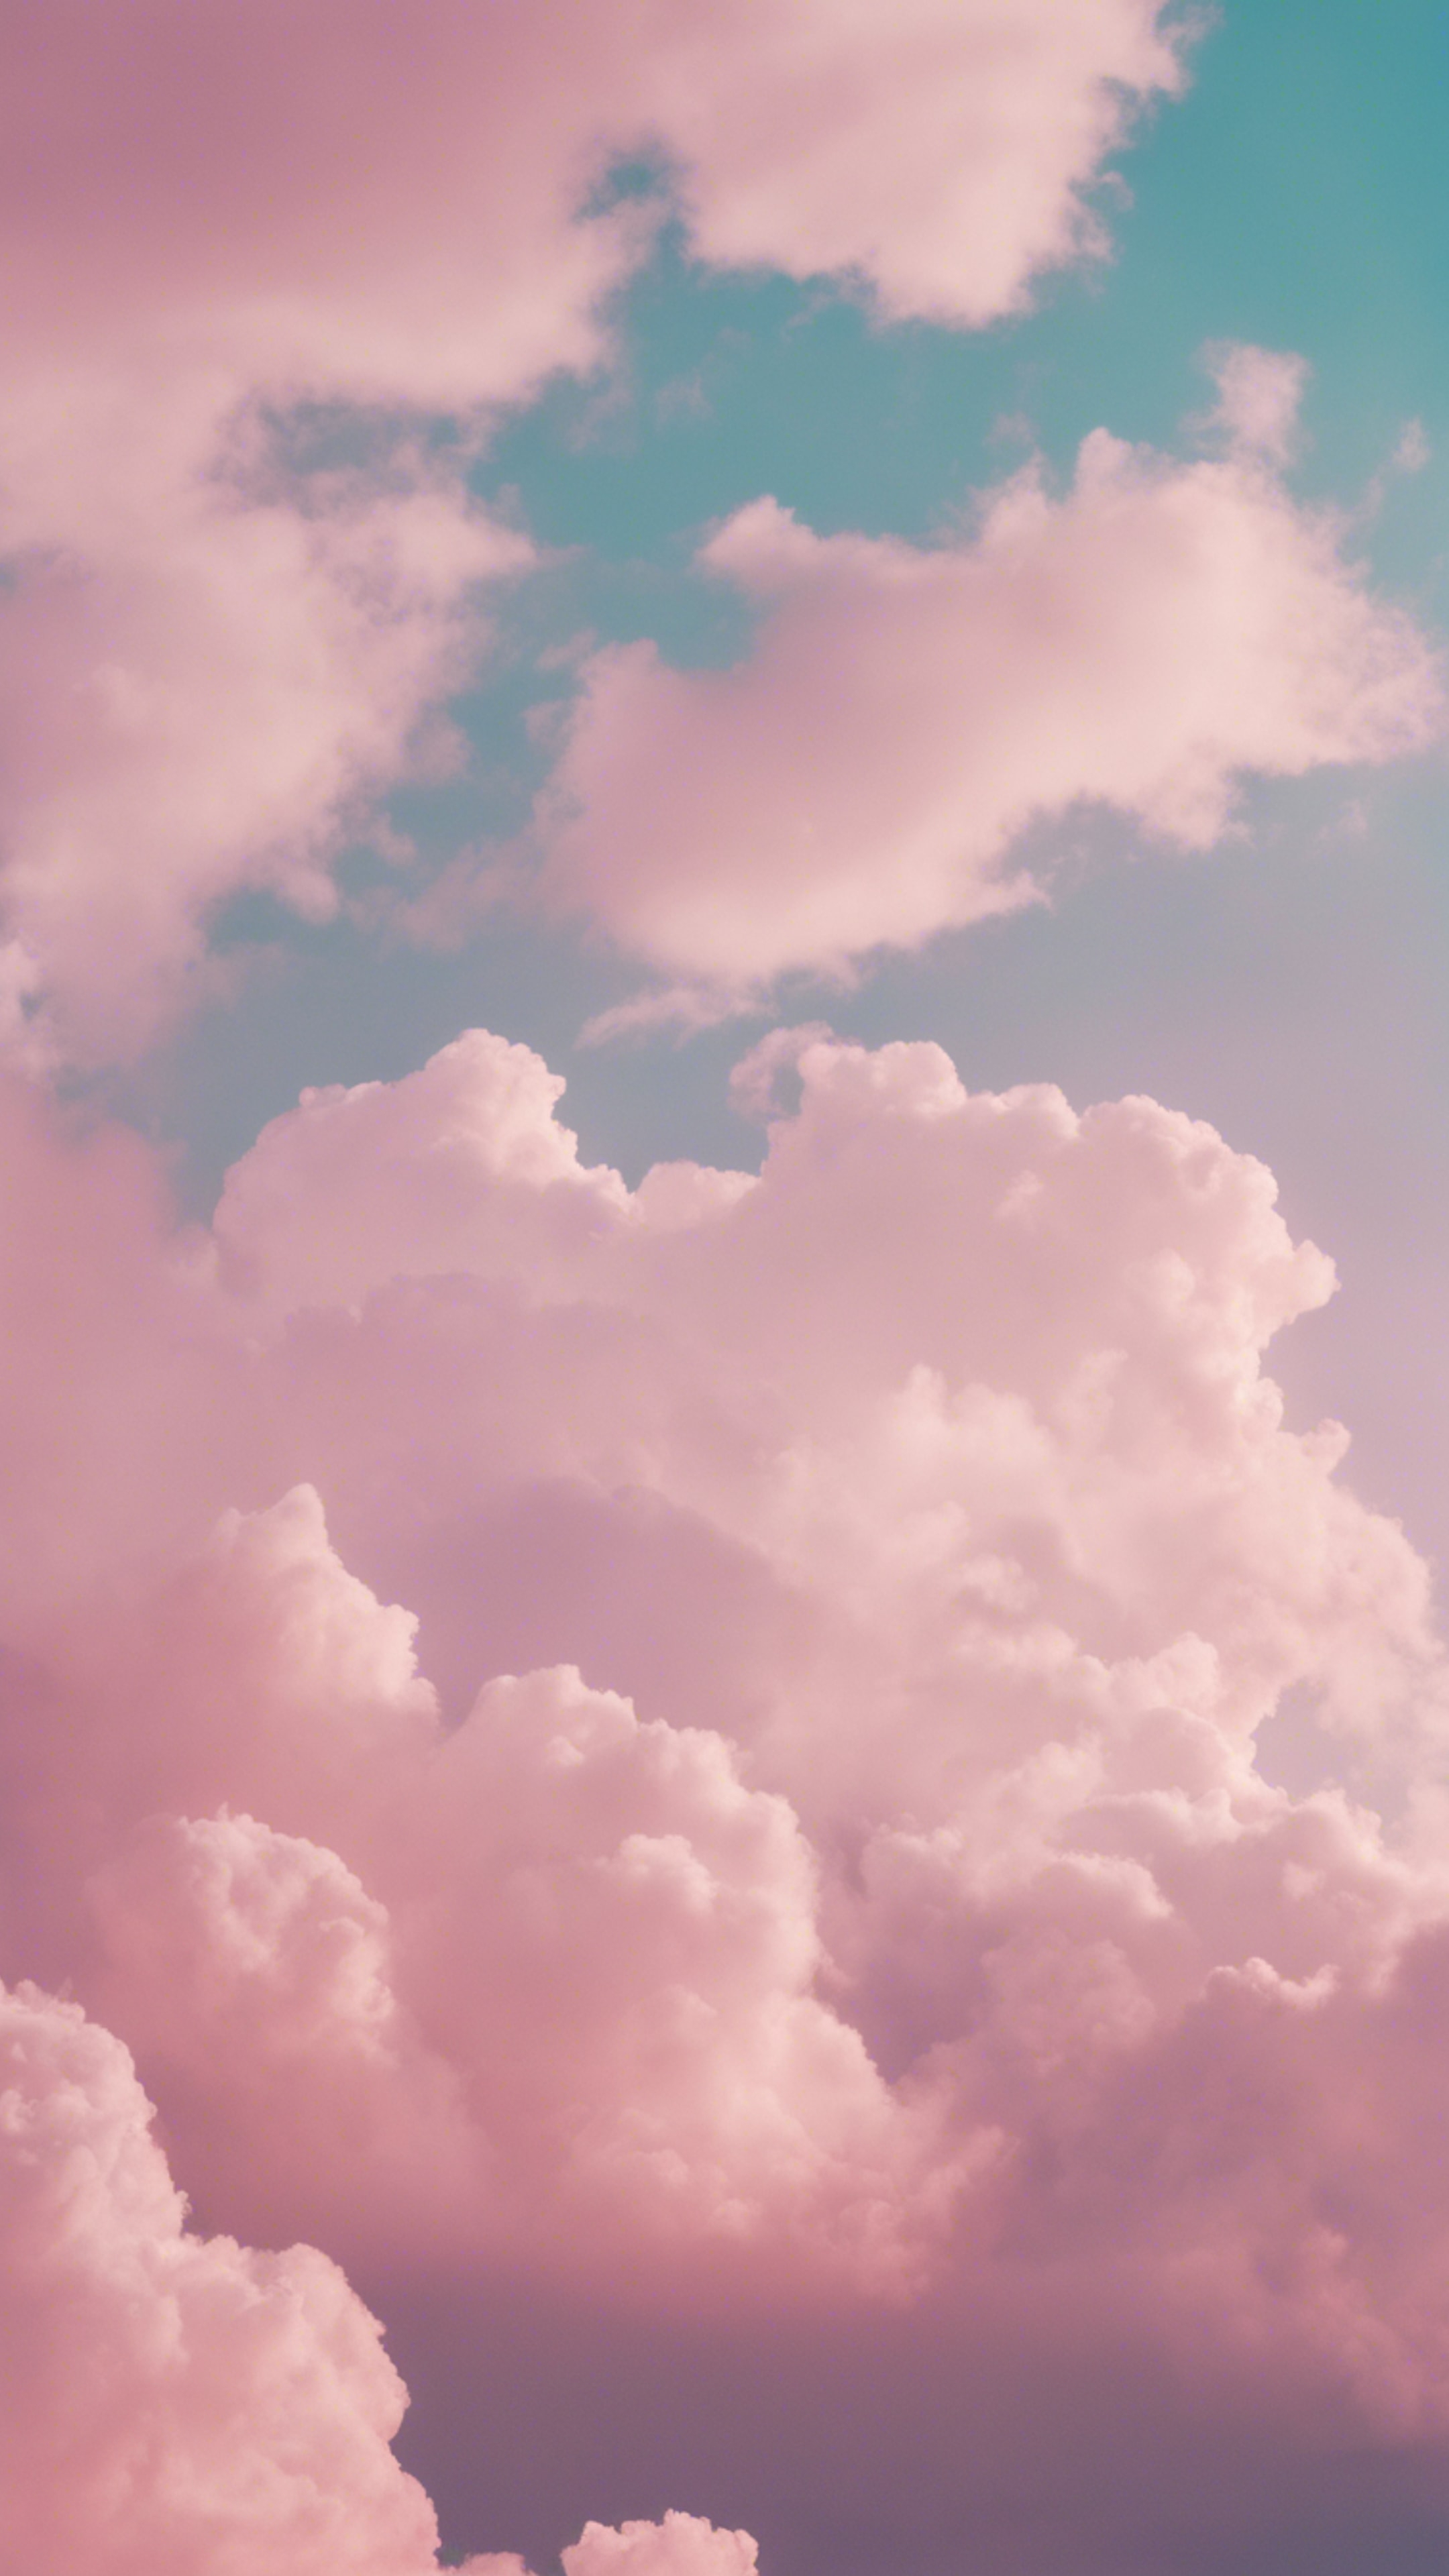 A surreal sky with a mix of pastel tones influenced by Y2K digital aesthetic. Hintergrund[d53cf796167a434cb2de]